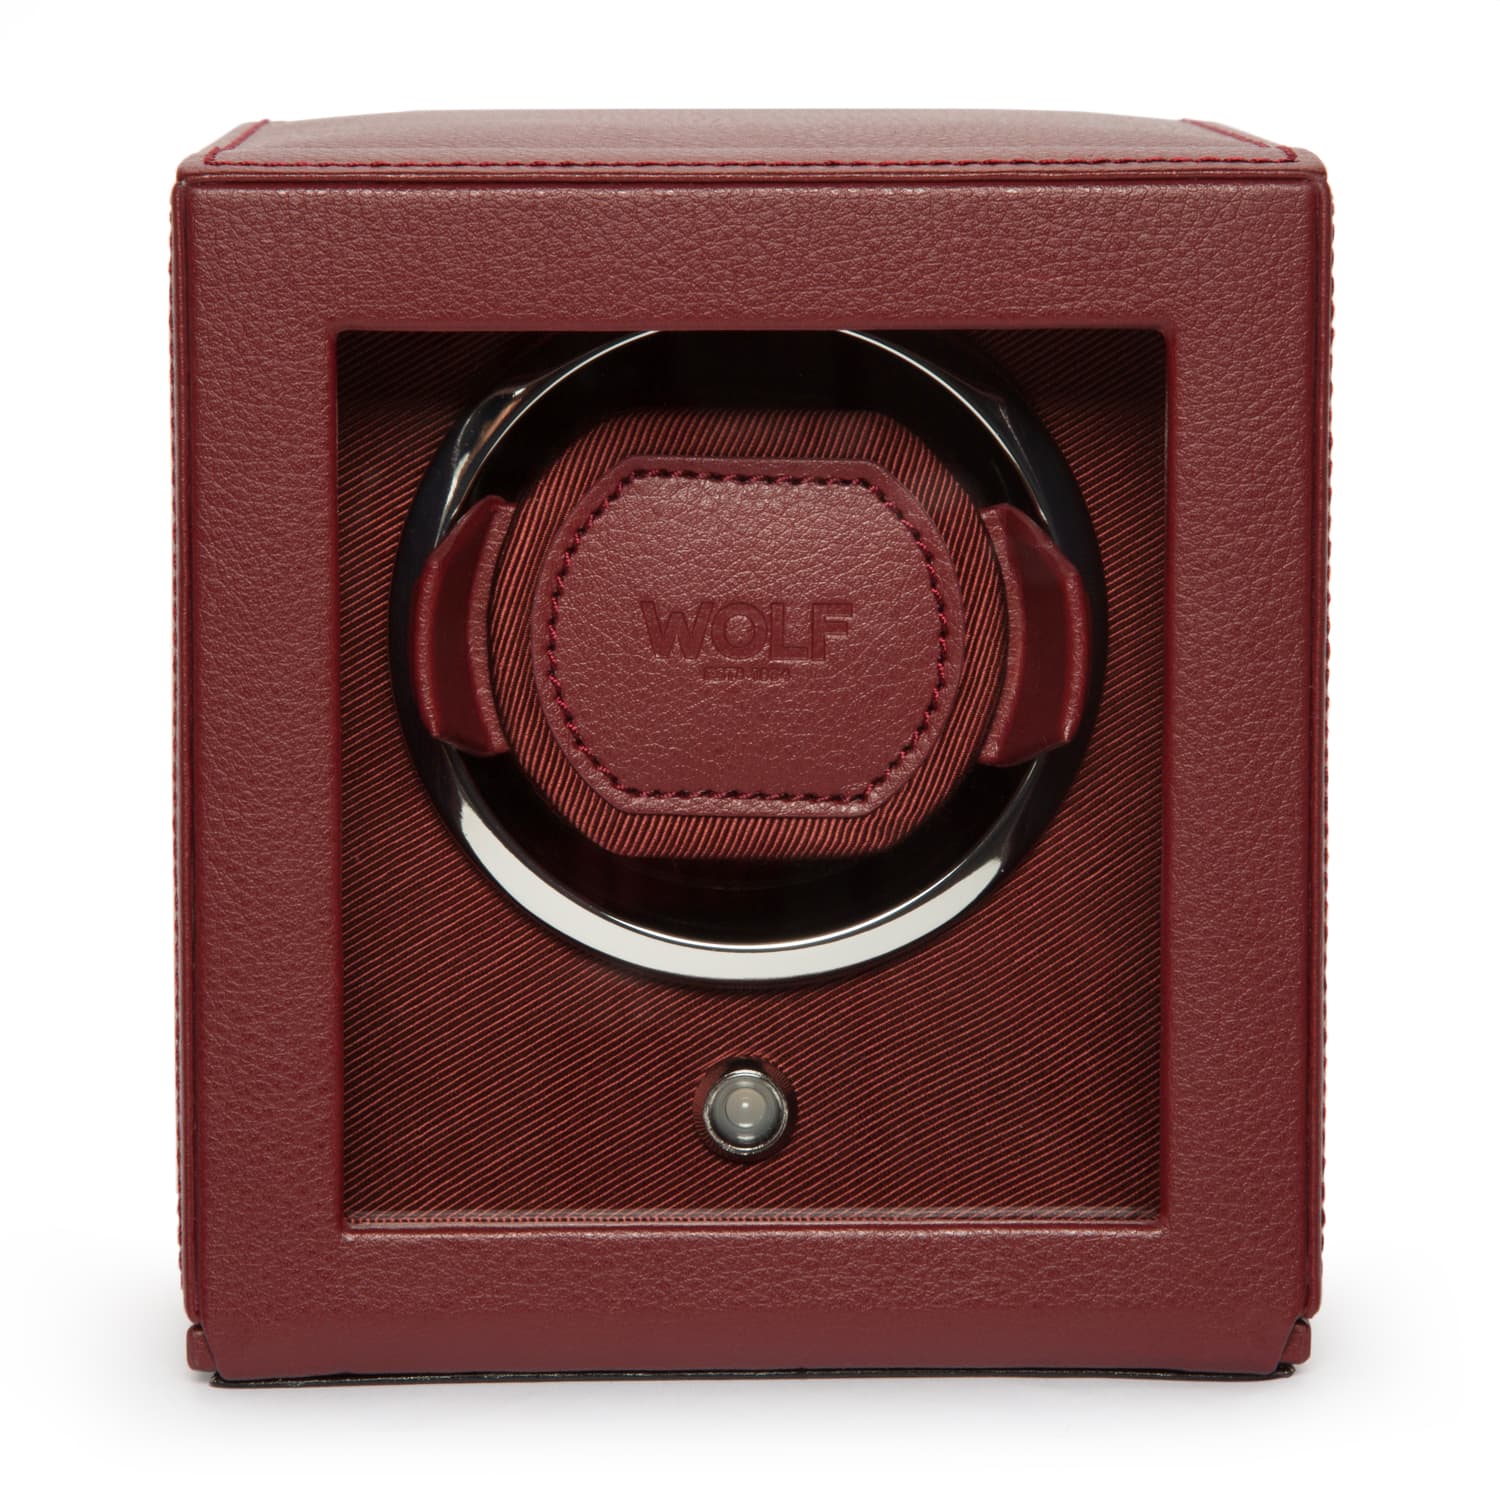 Wolf Cub Single Watch Winder with Cover Bordeaux 461126